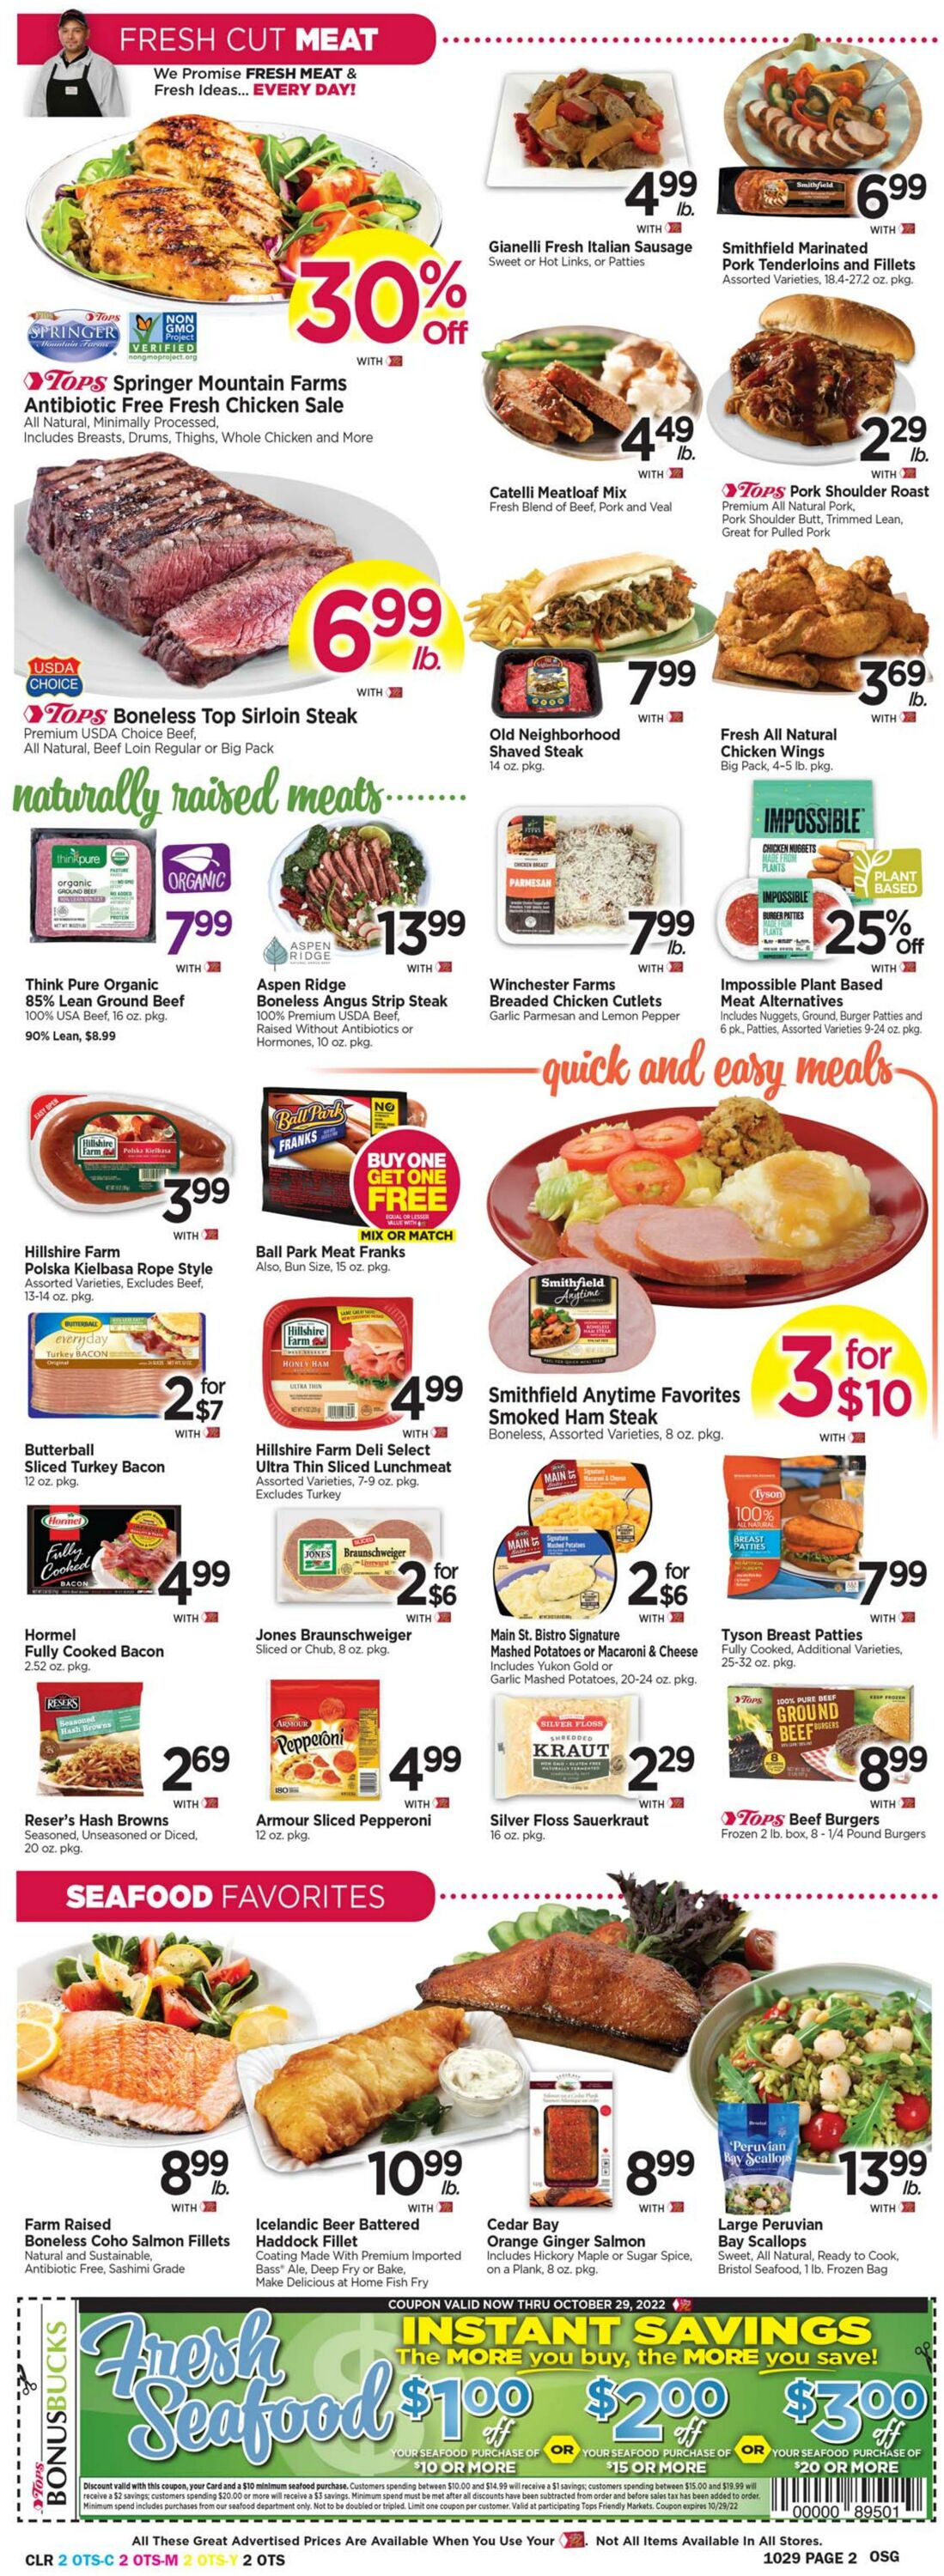 Weekly ad Tops Friendly Markets 10/23/2022-10/29/2022